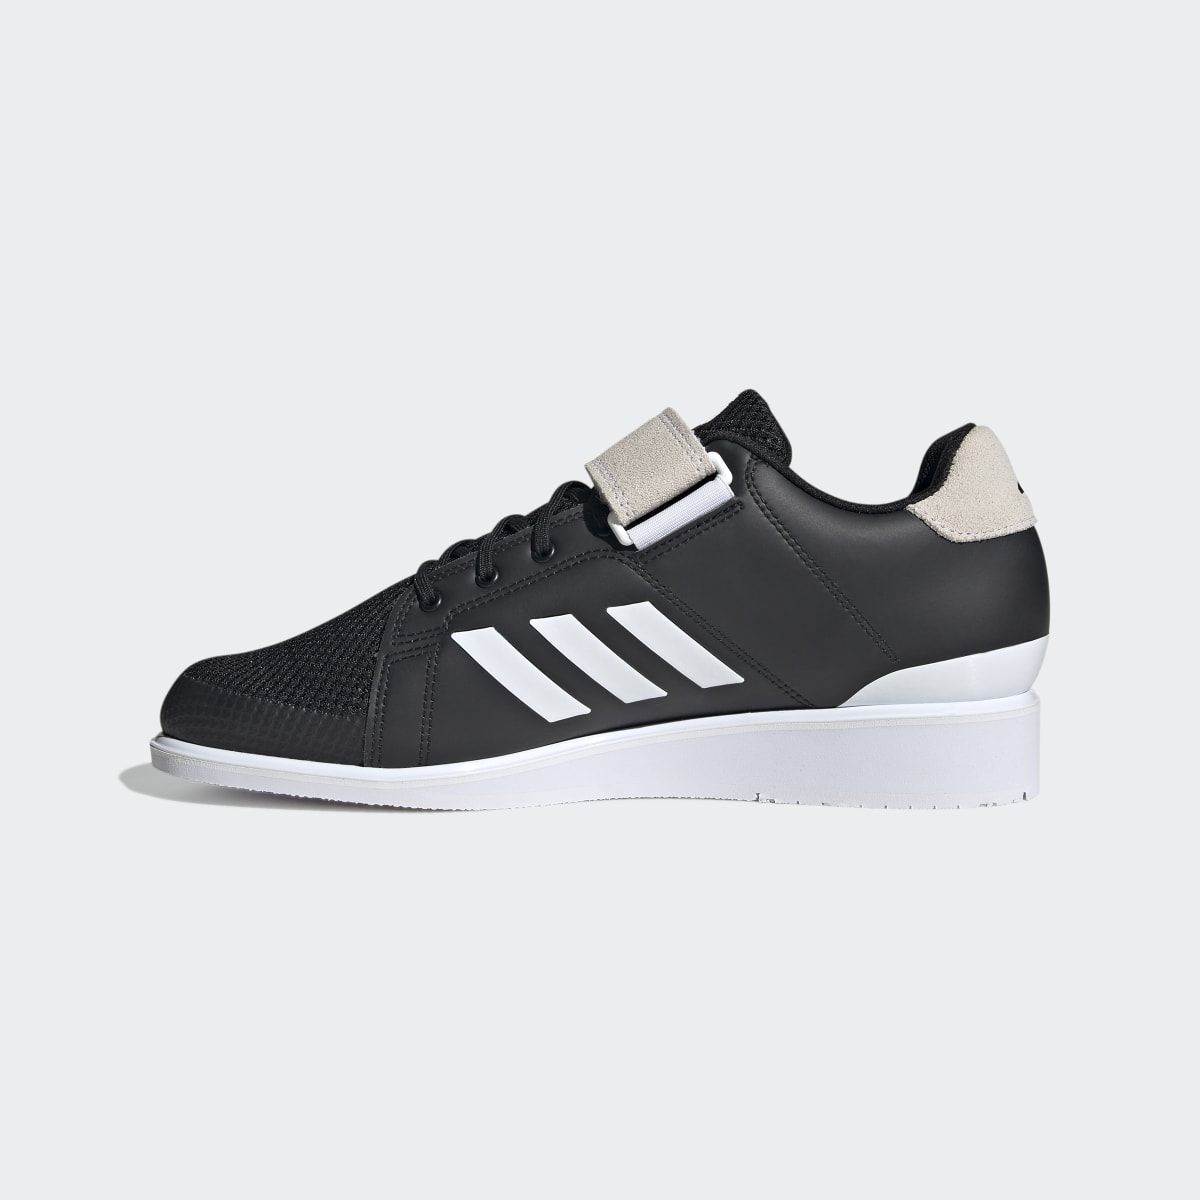 Adidas Power Perfect 3 Tokyo Weightlifting Shoes. 7